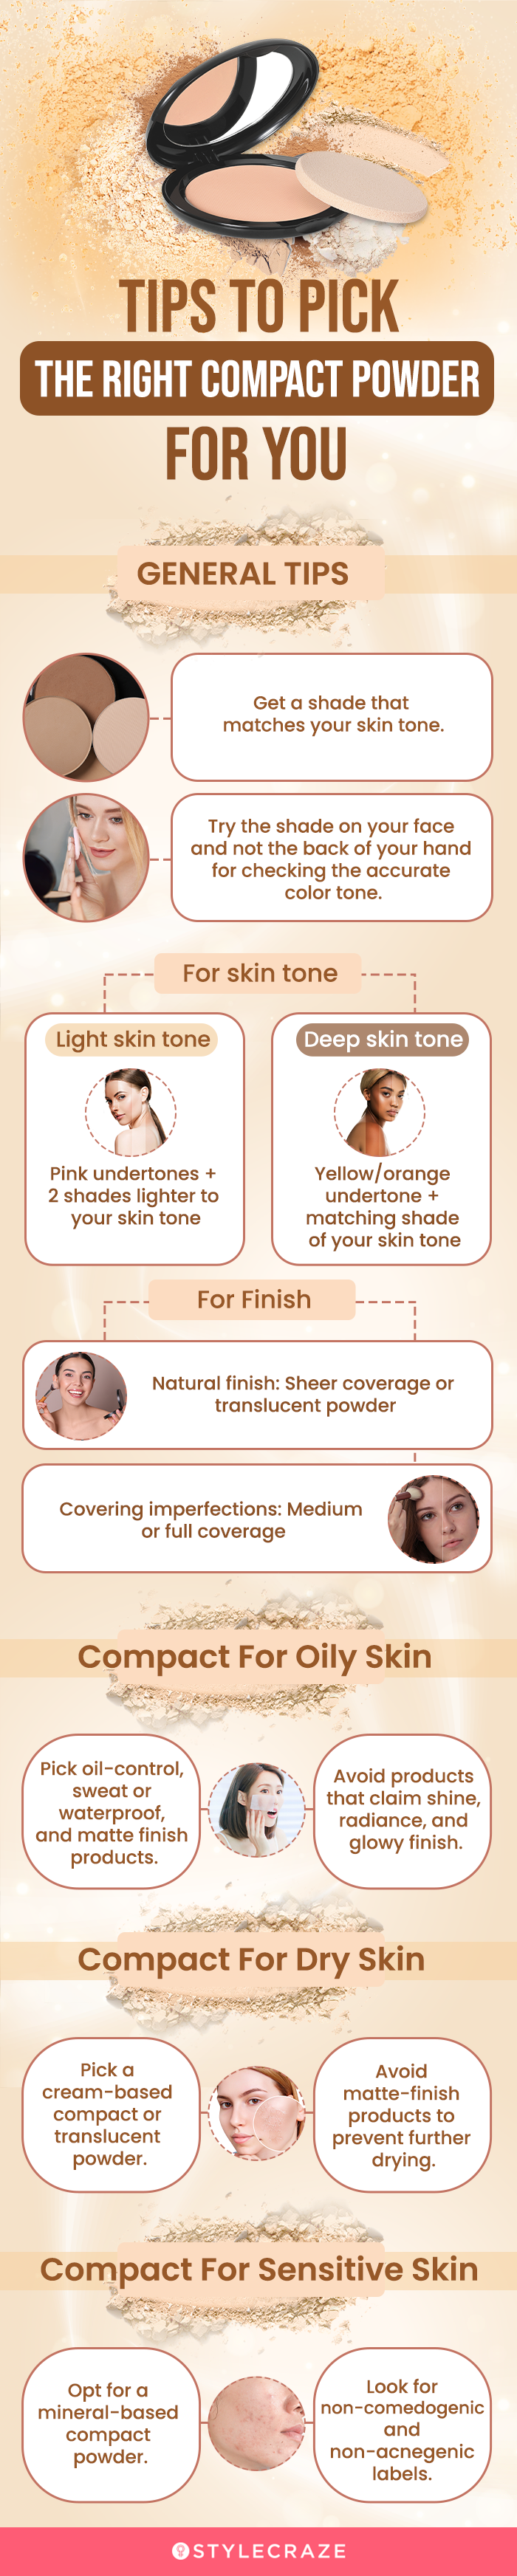 tips to pick the right compact powder for you [infographic]